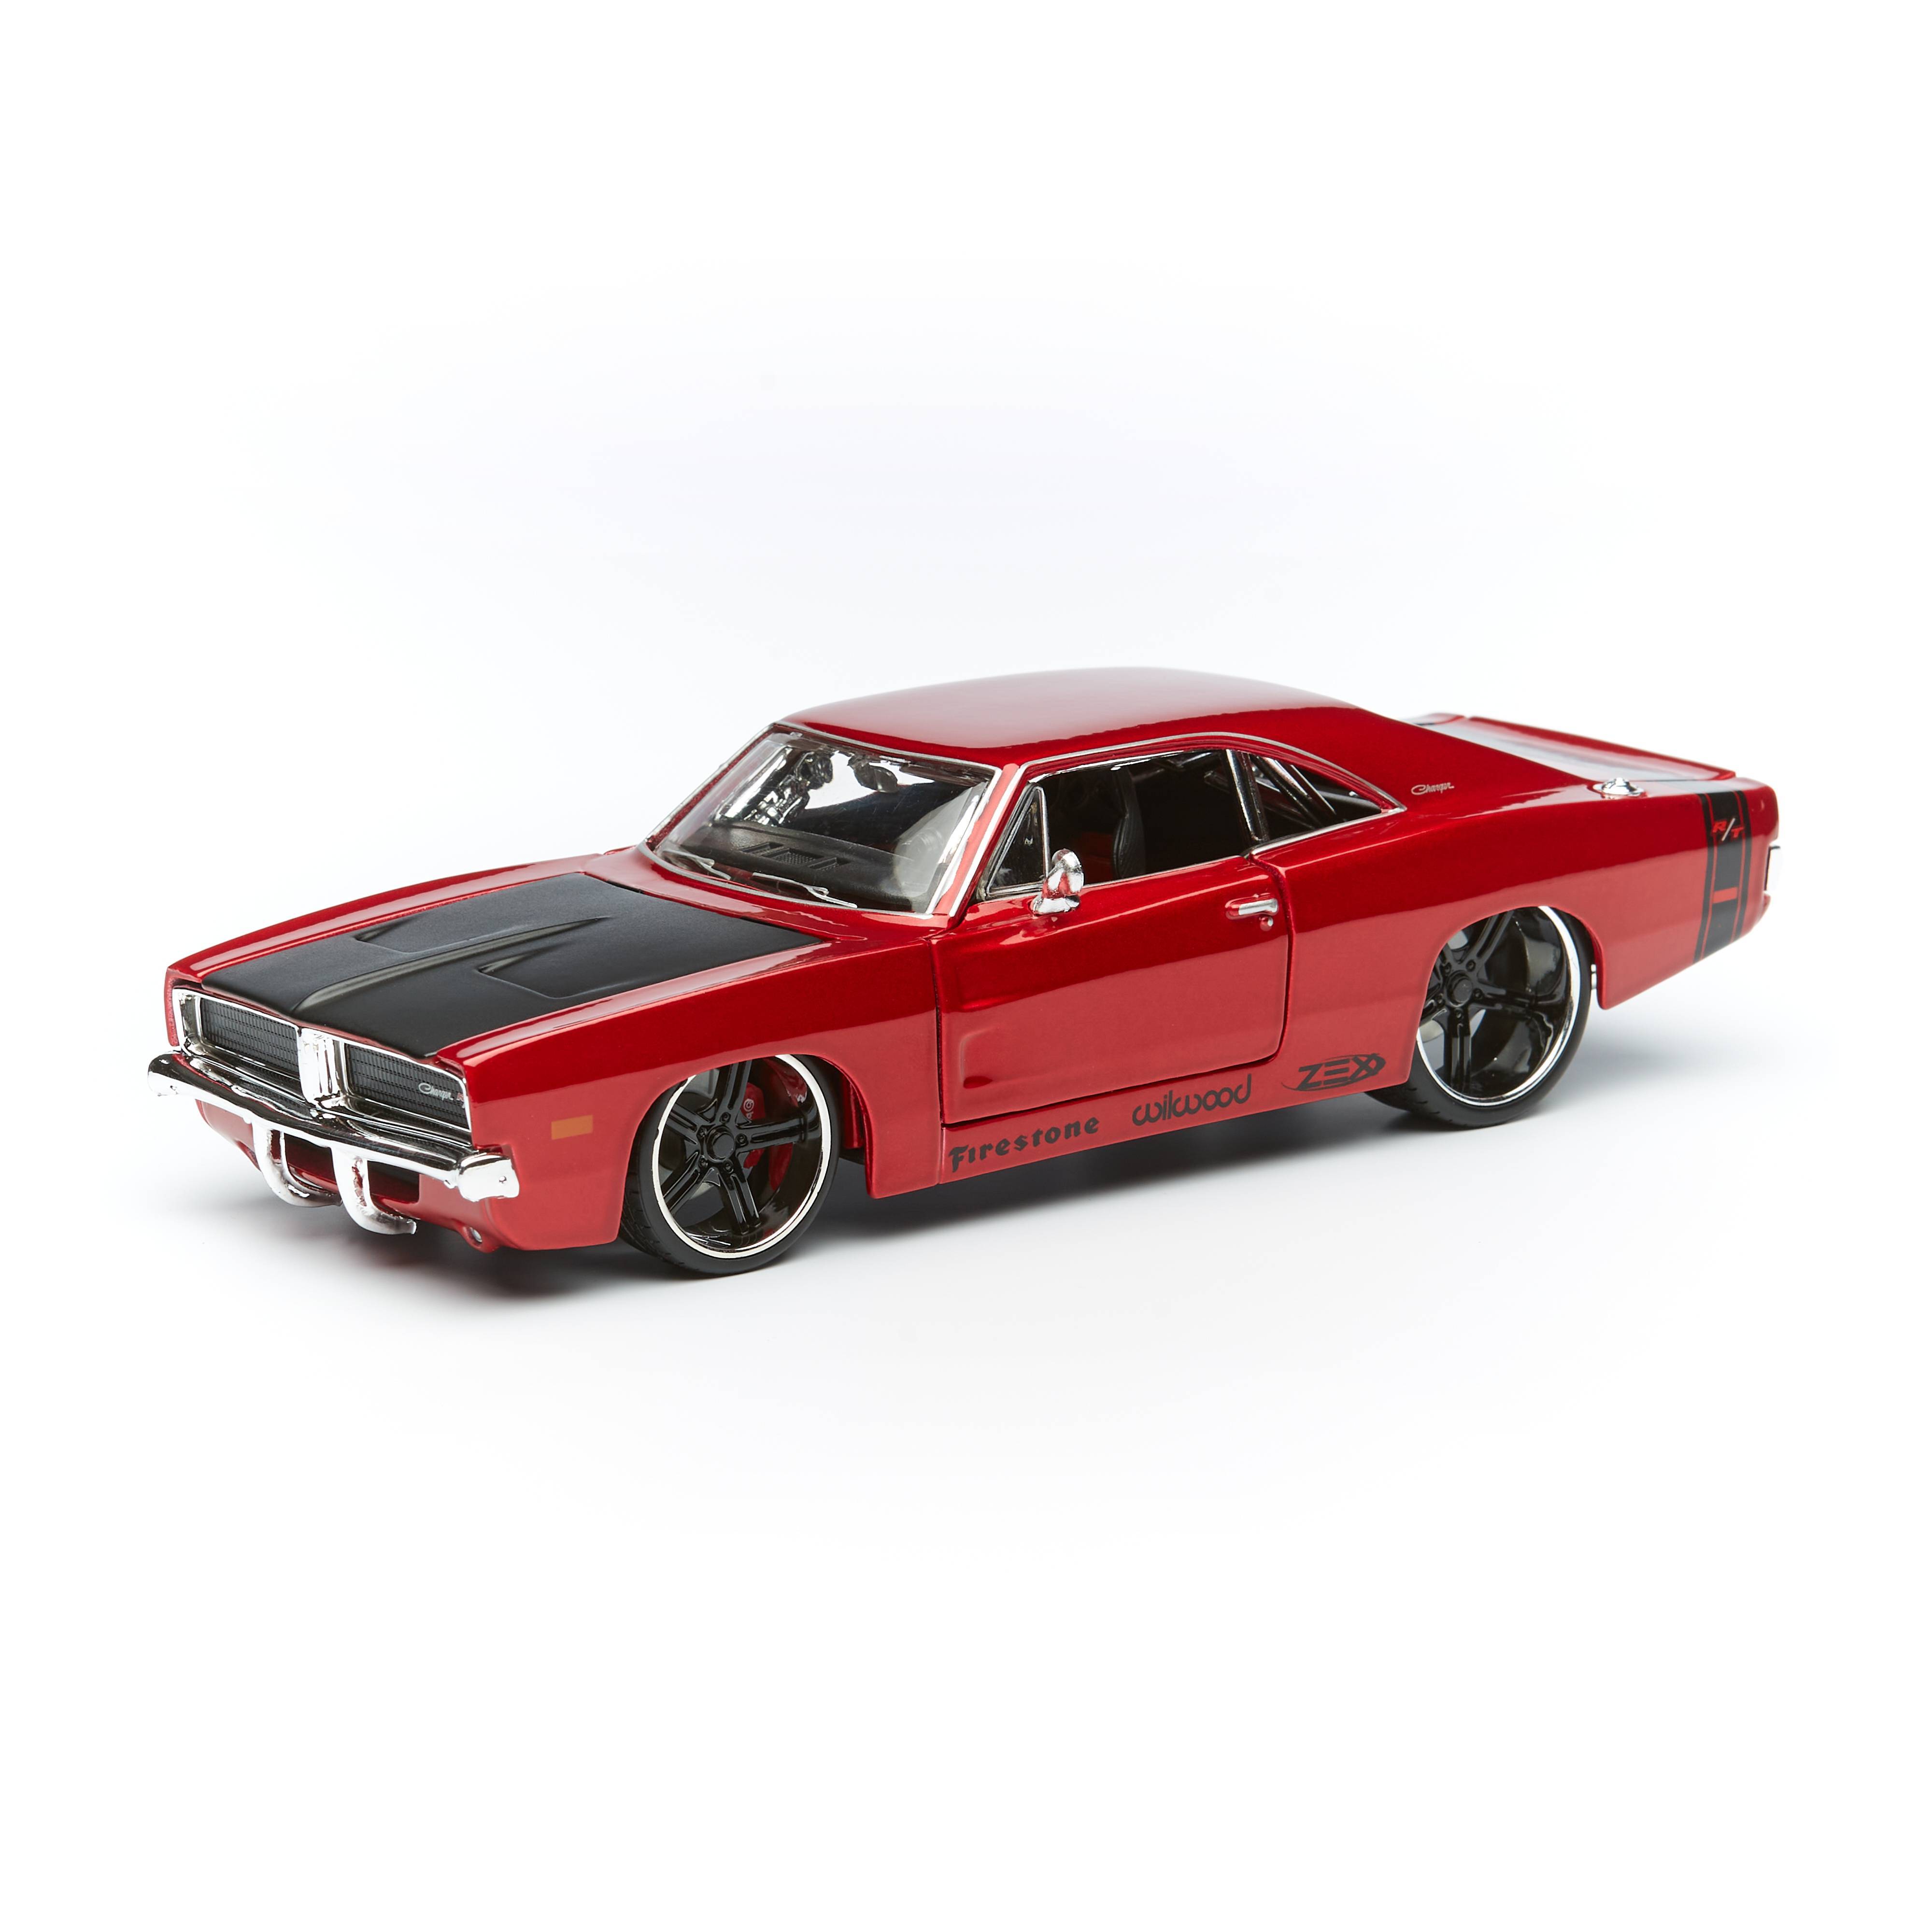 Maisto Машинка 1:25 Design Classic Muscle - 1969 Dodge Charger R/T, красная 32537 maisto 1 18 1969 dodge charger r t alloy car model decorations datsun 240z 1956 wolkswagen beetle diecast vehicles collectibles